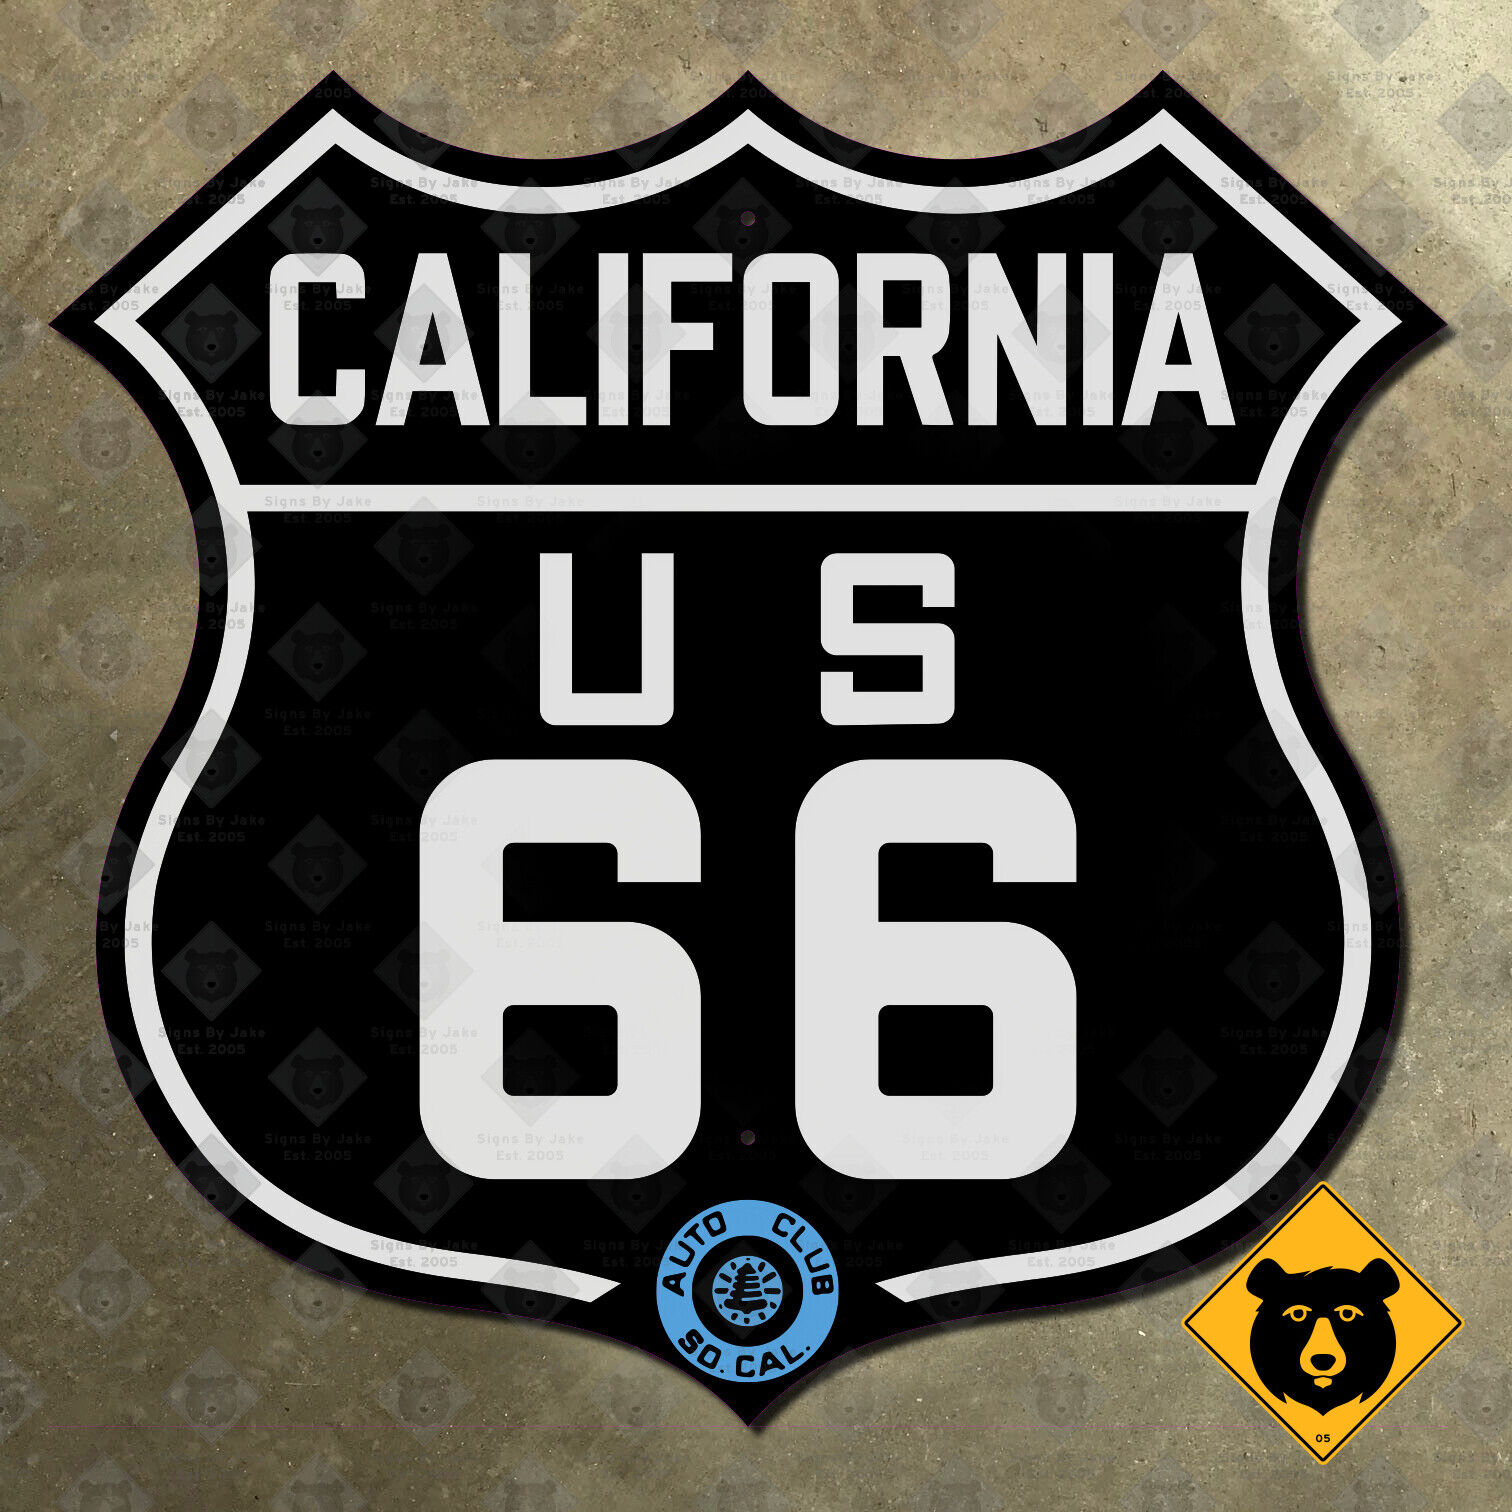 California US route 66 marker 1928 ACSC mother road auto club sign black 36x35